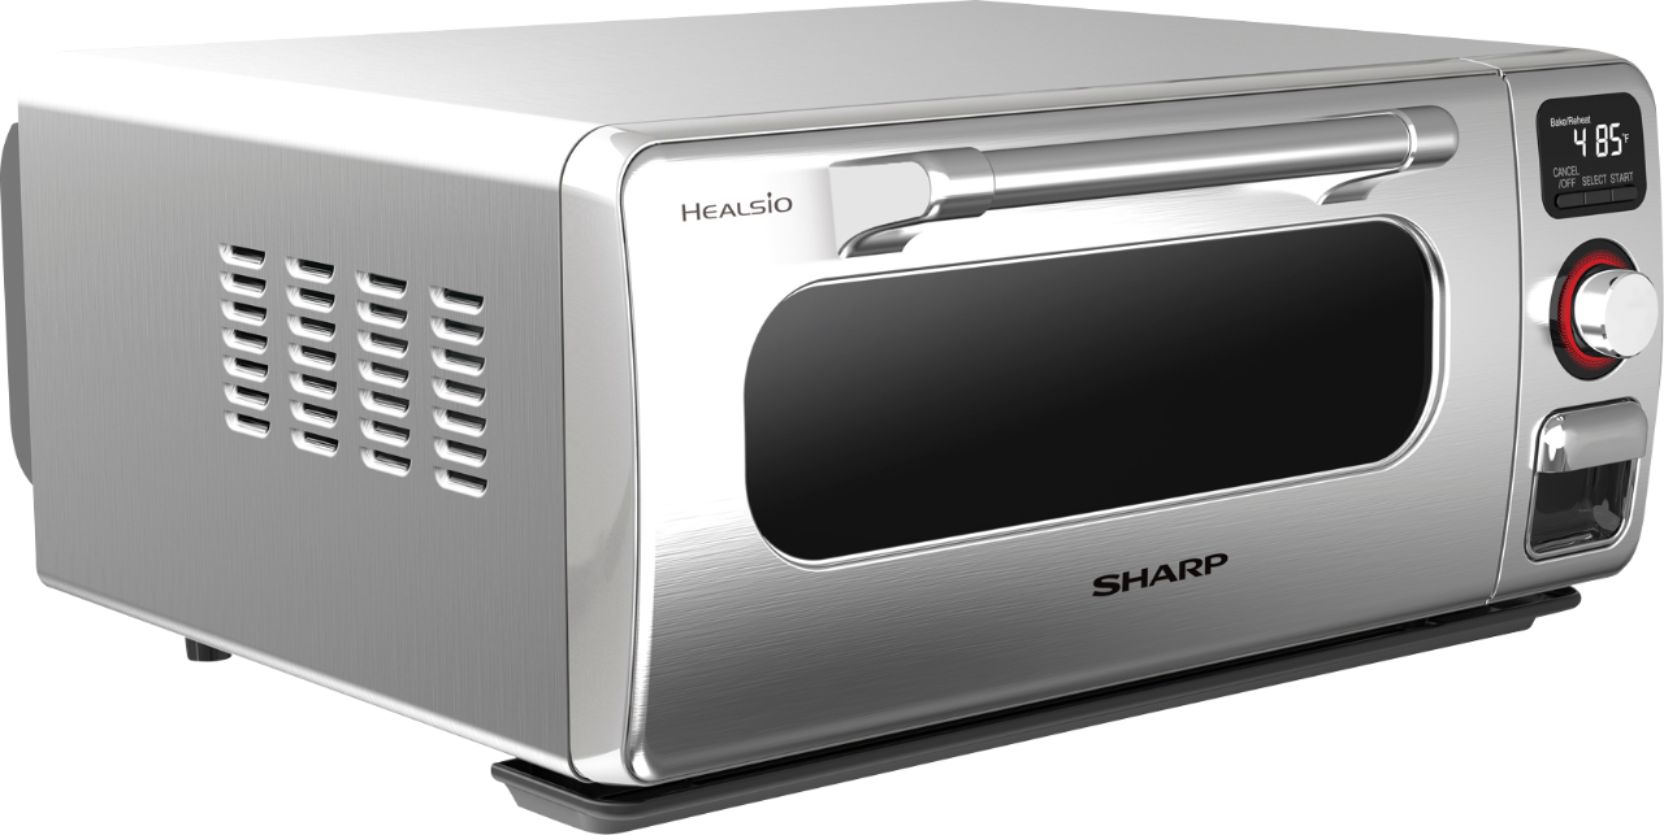 Sharp Steam Oven Review - AX1200S Convection Microwave Combo